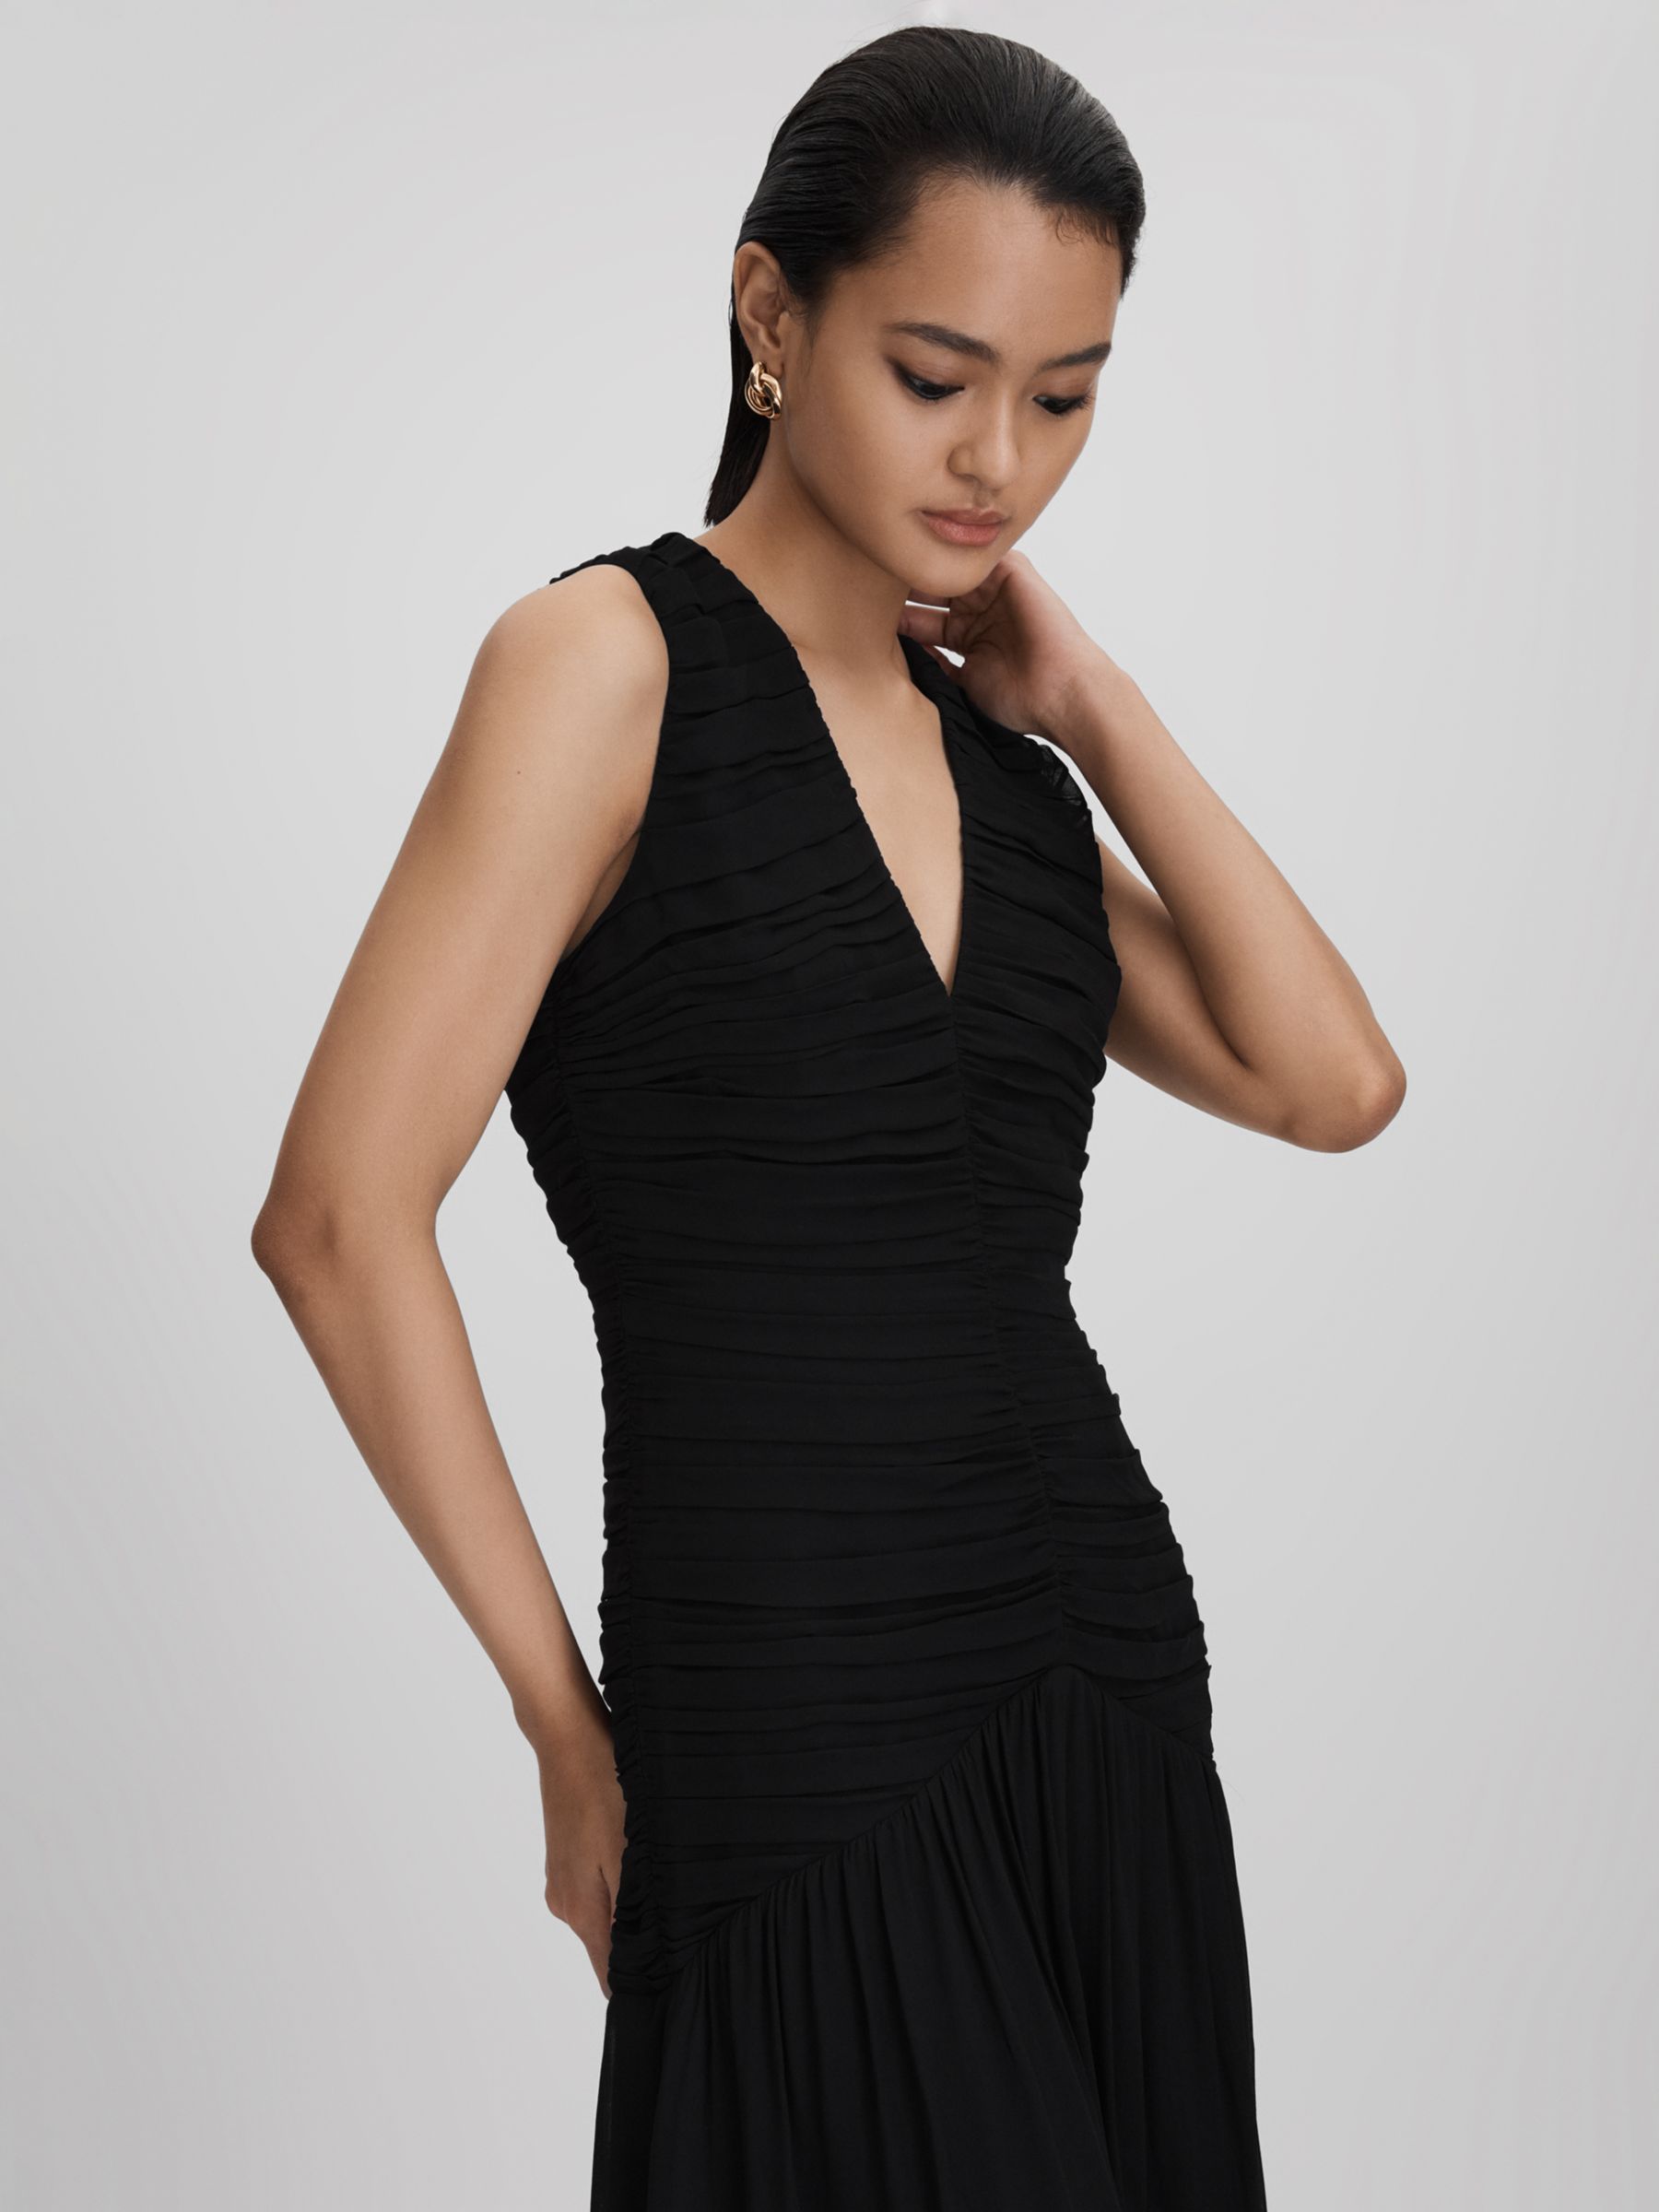 Buy Reiss Saffy Ruched Midi Dress Online at johnlewis.com